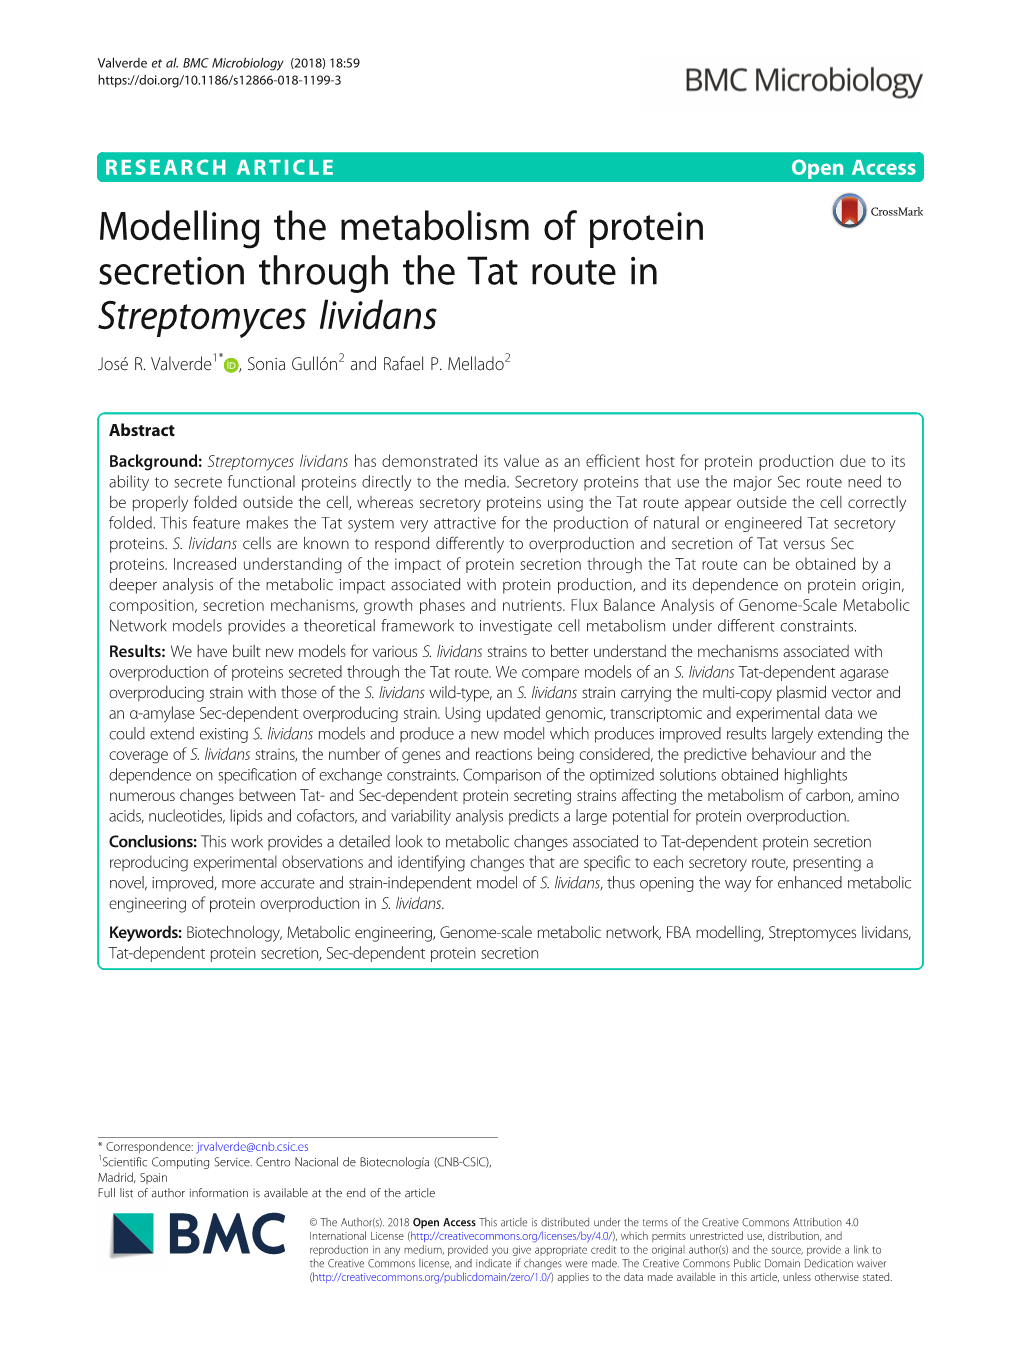 Modelling the Metabolism of Protein Secretion Through the Tat Route in Streptomyces Lividans José R